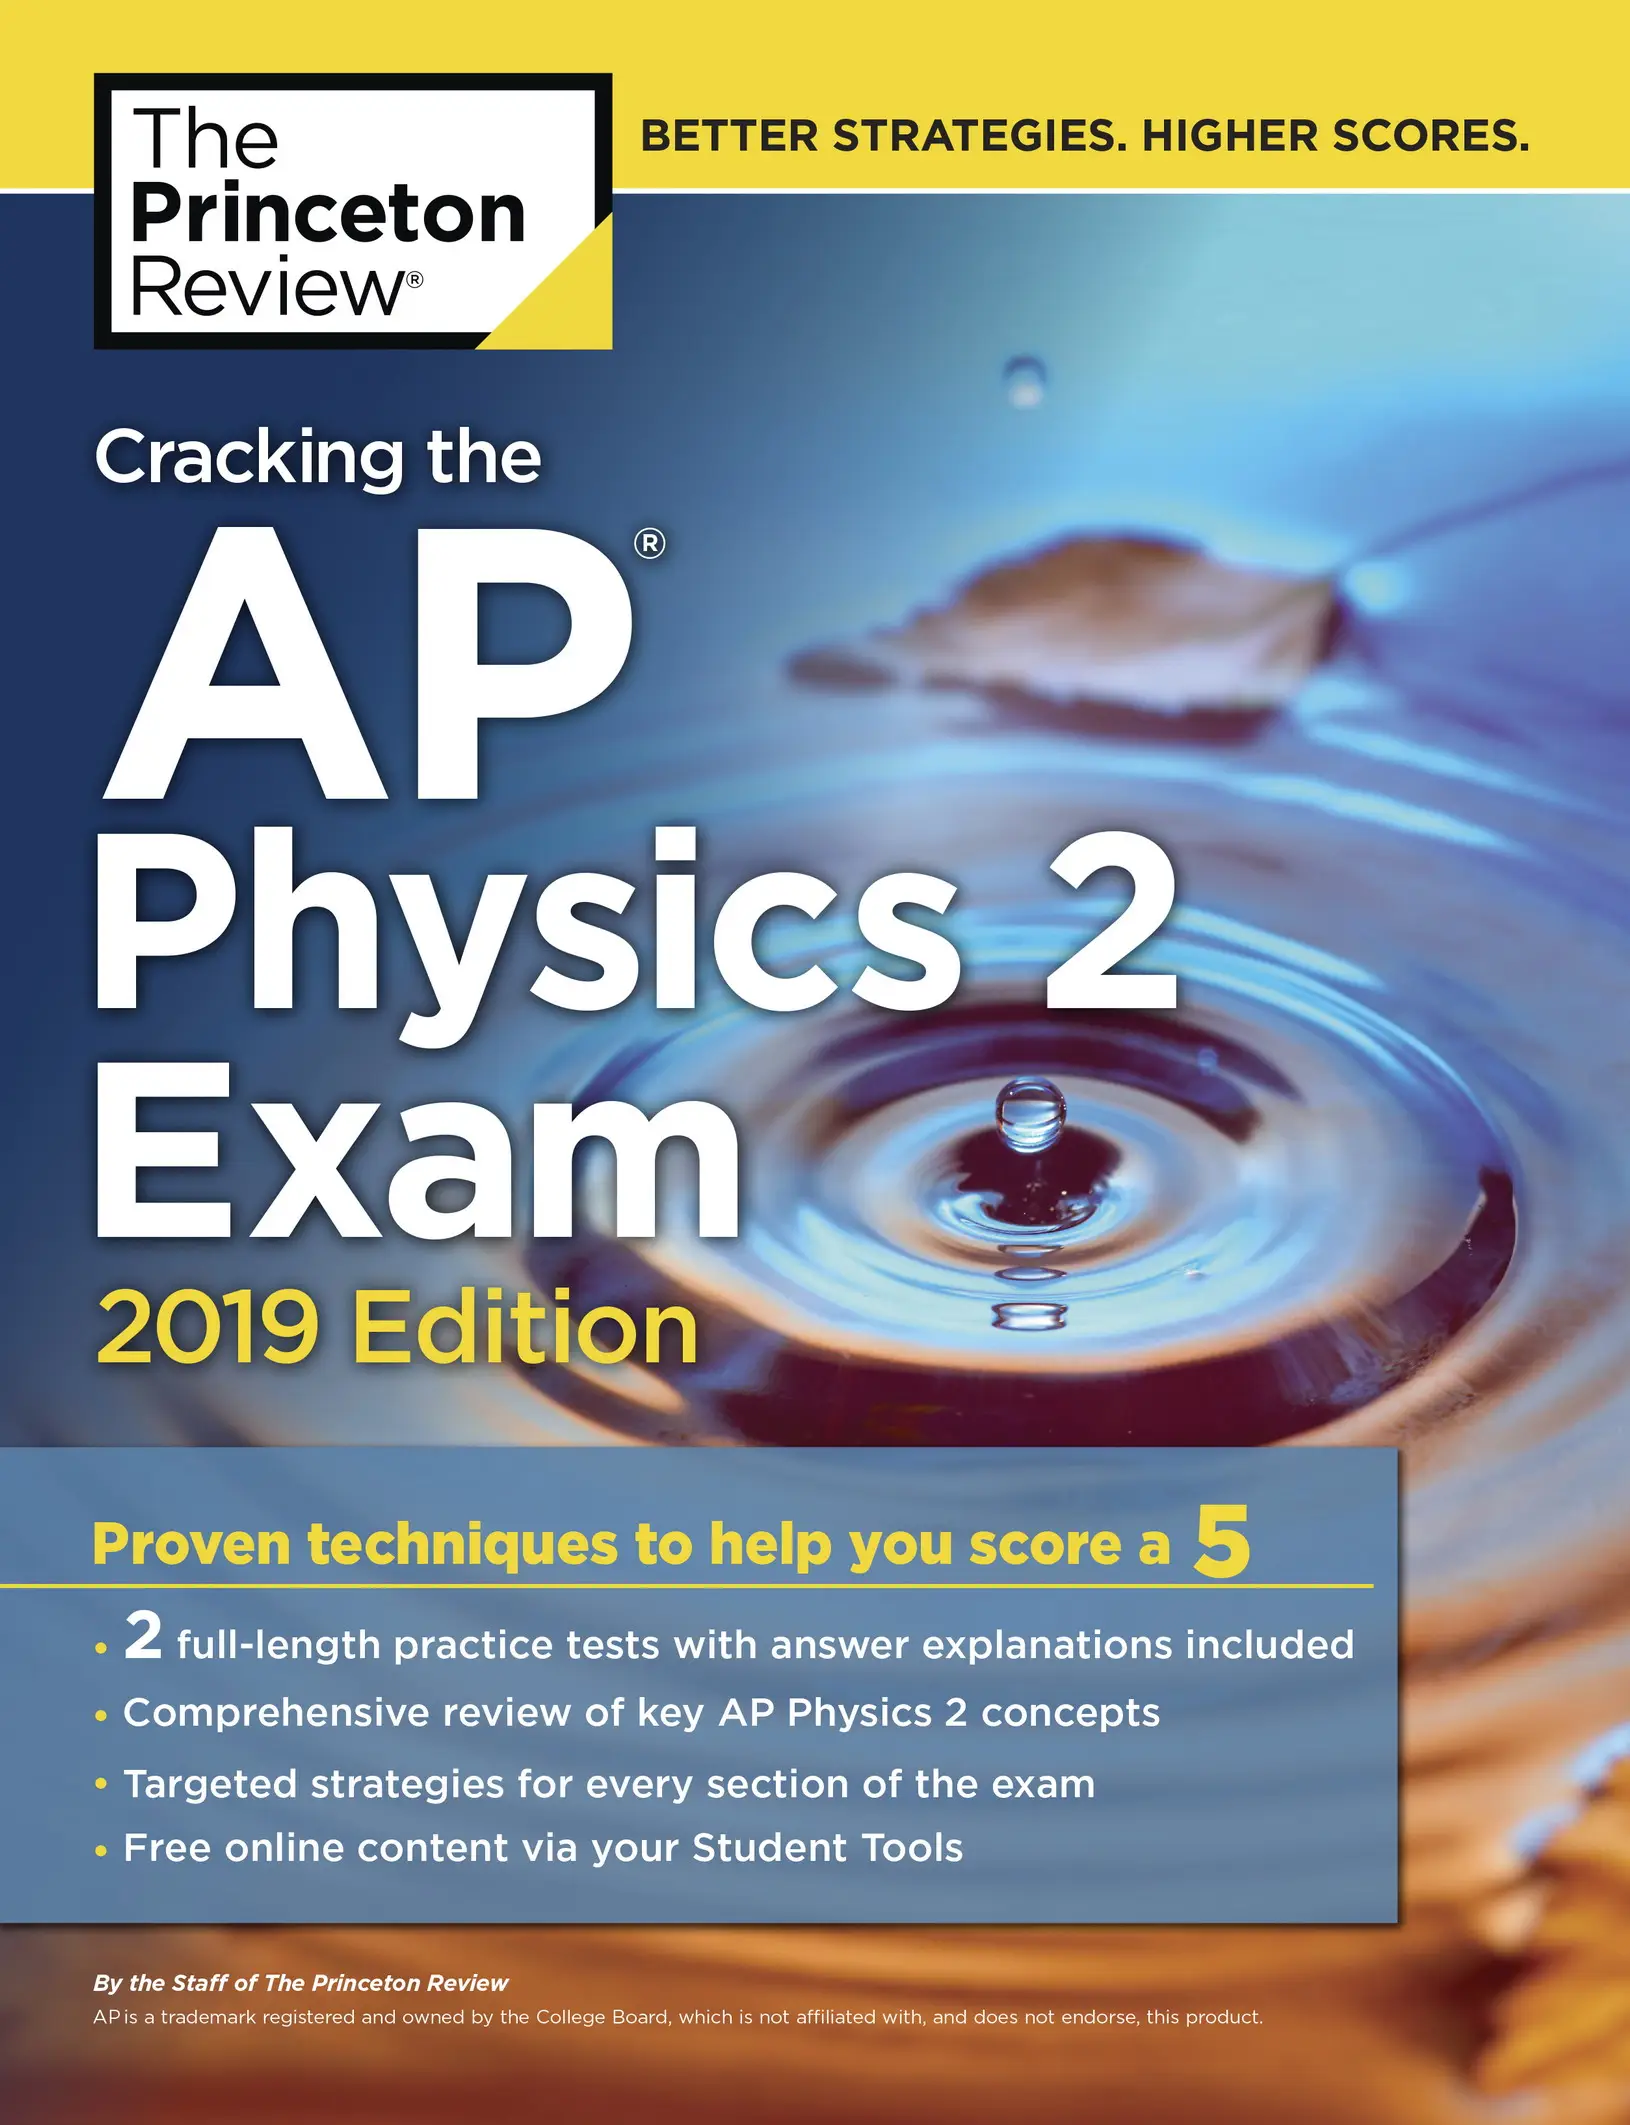 Cracking the AP Physics 2 Exam, 2019 Edition Practice Tests & Proven